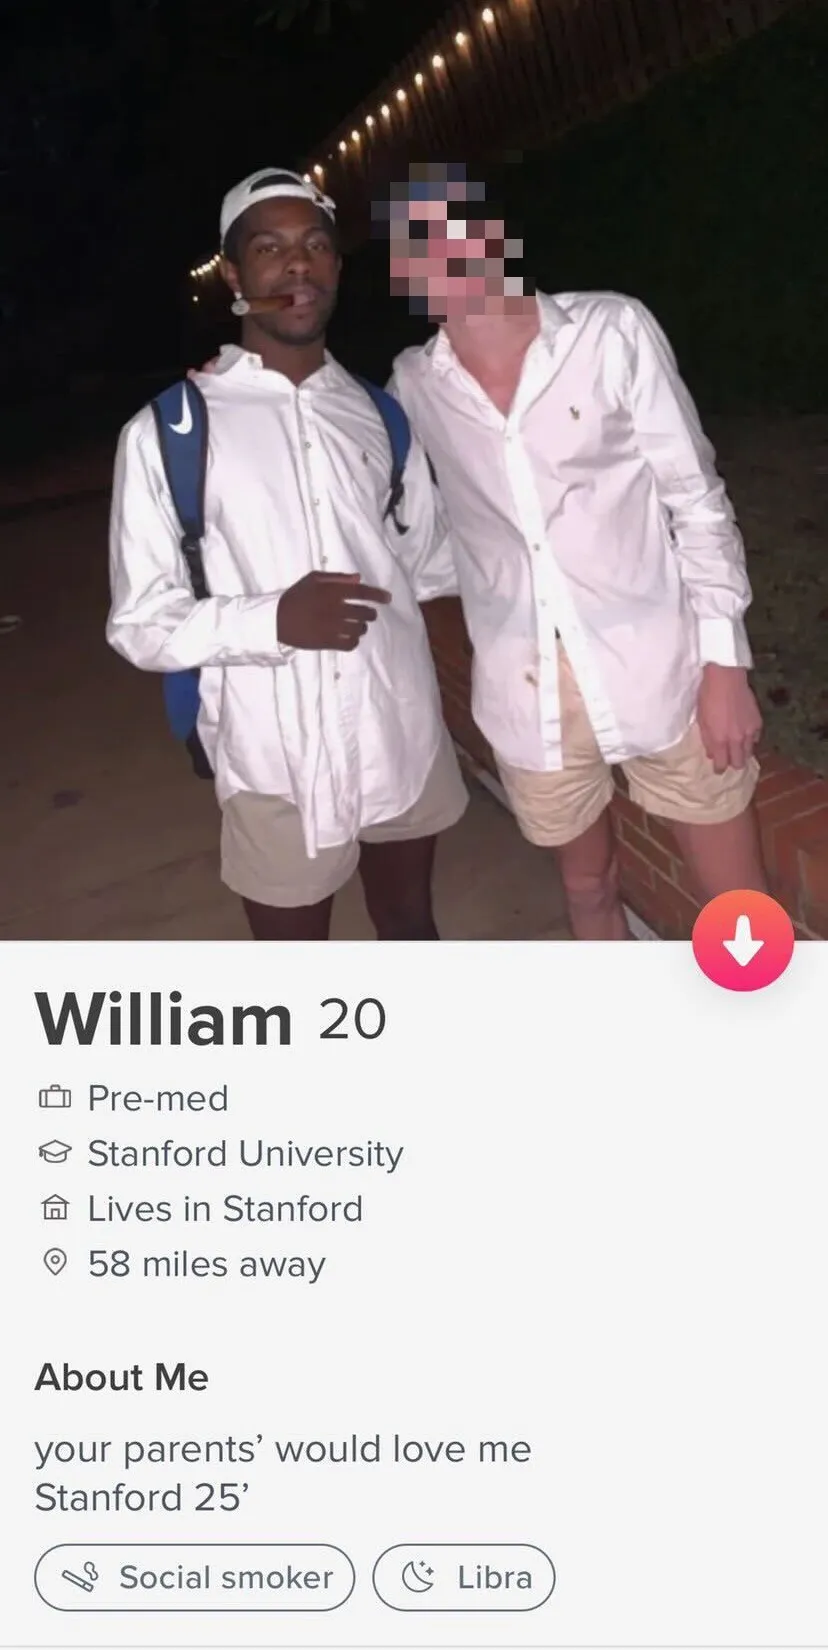 A Tinder profile for "William, 20, pre-med at Stanford." The profile says "your parents would love me." The photo shows Curry smoking a cigar in a collared shirt with another man, both wearing backwards baseball caps.